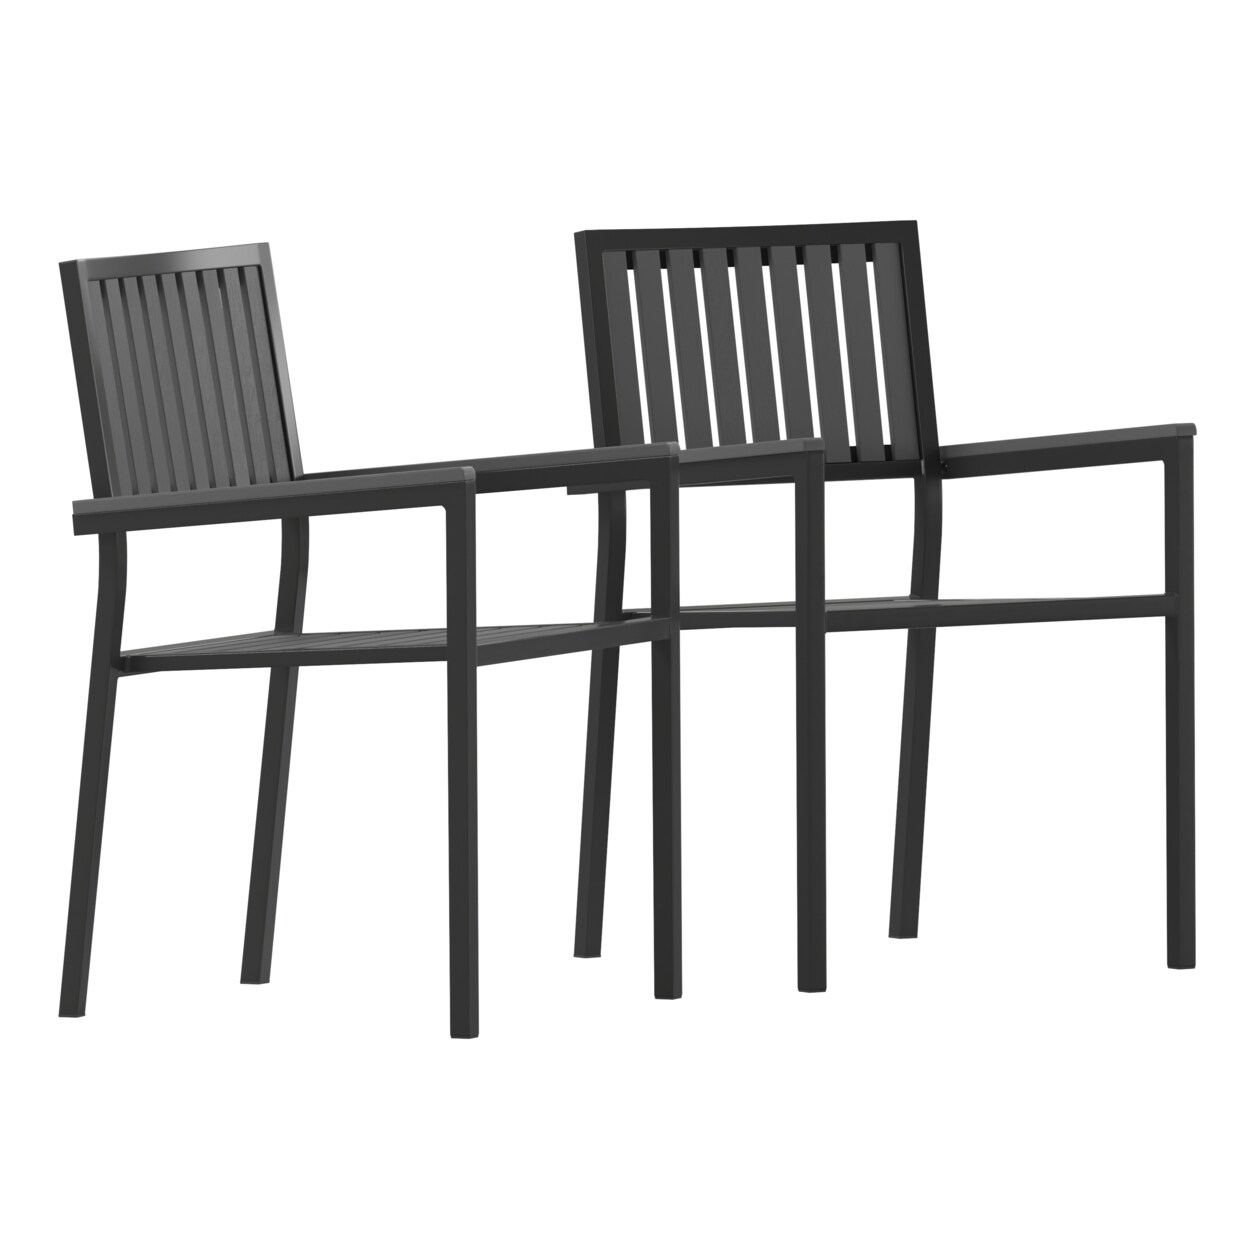 Flash Furniture 2PK Black Outdoor Patio Chairs